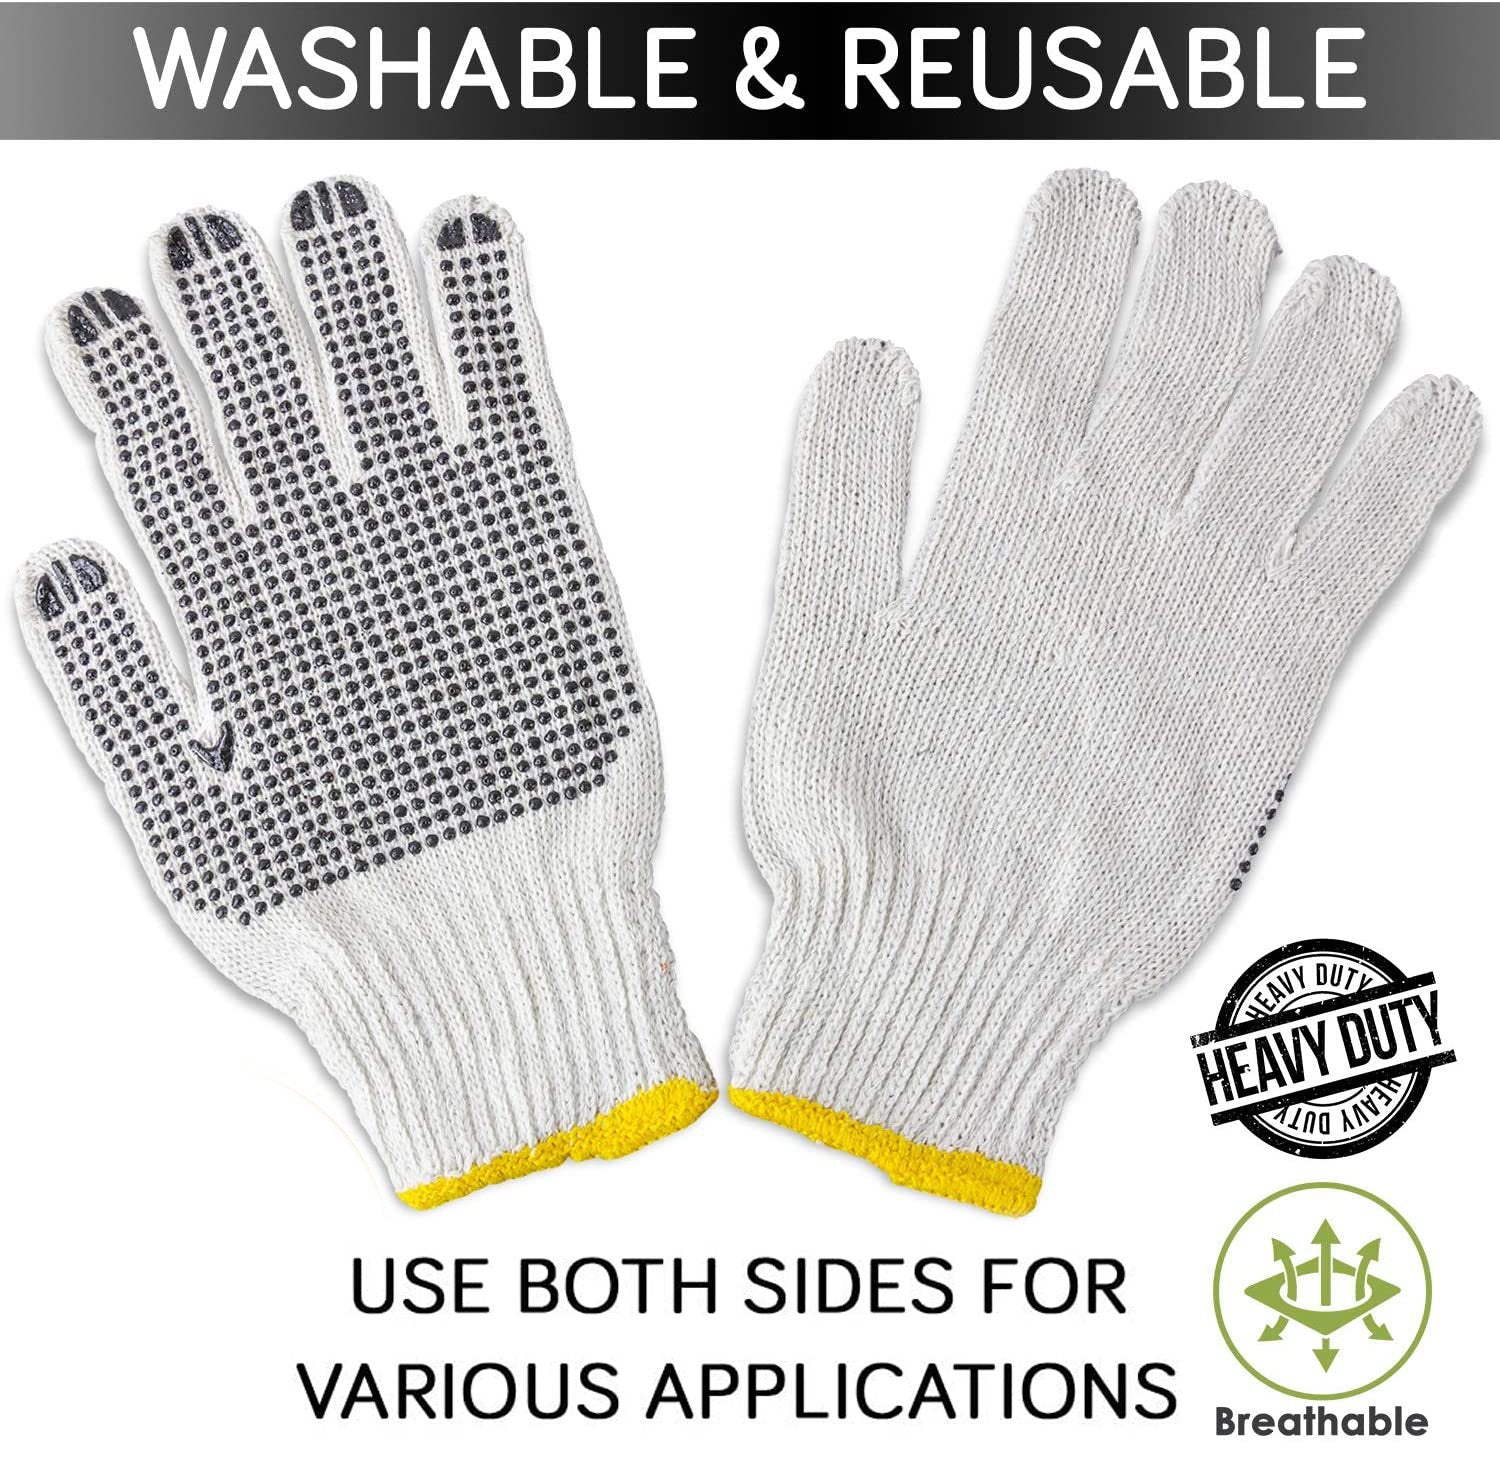 4611 Unisex Knitted/Sewing Cotton Plain Hand Gloves Raw White - SkyShopy